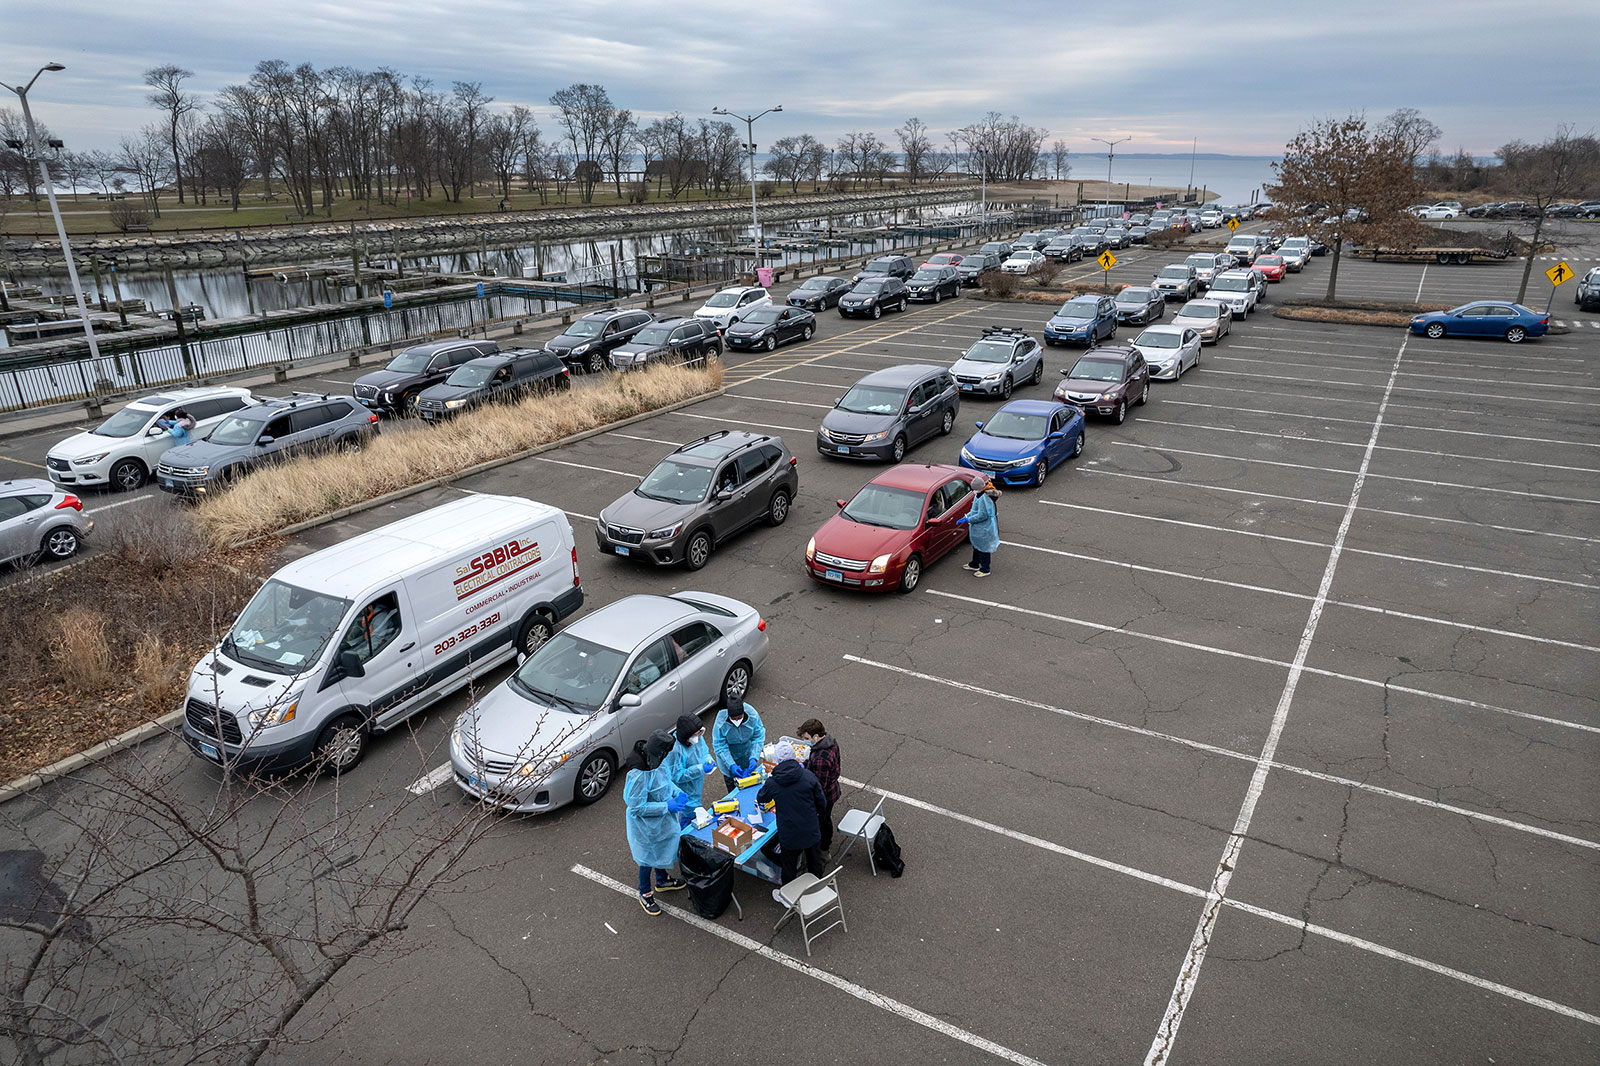 Health workers administer Covid-19 tests at a drive-through testing site in Stamford, Connecticut, on December 28.